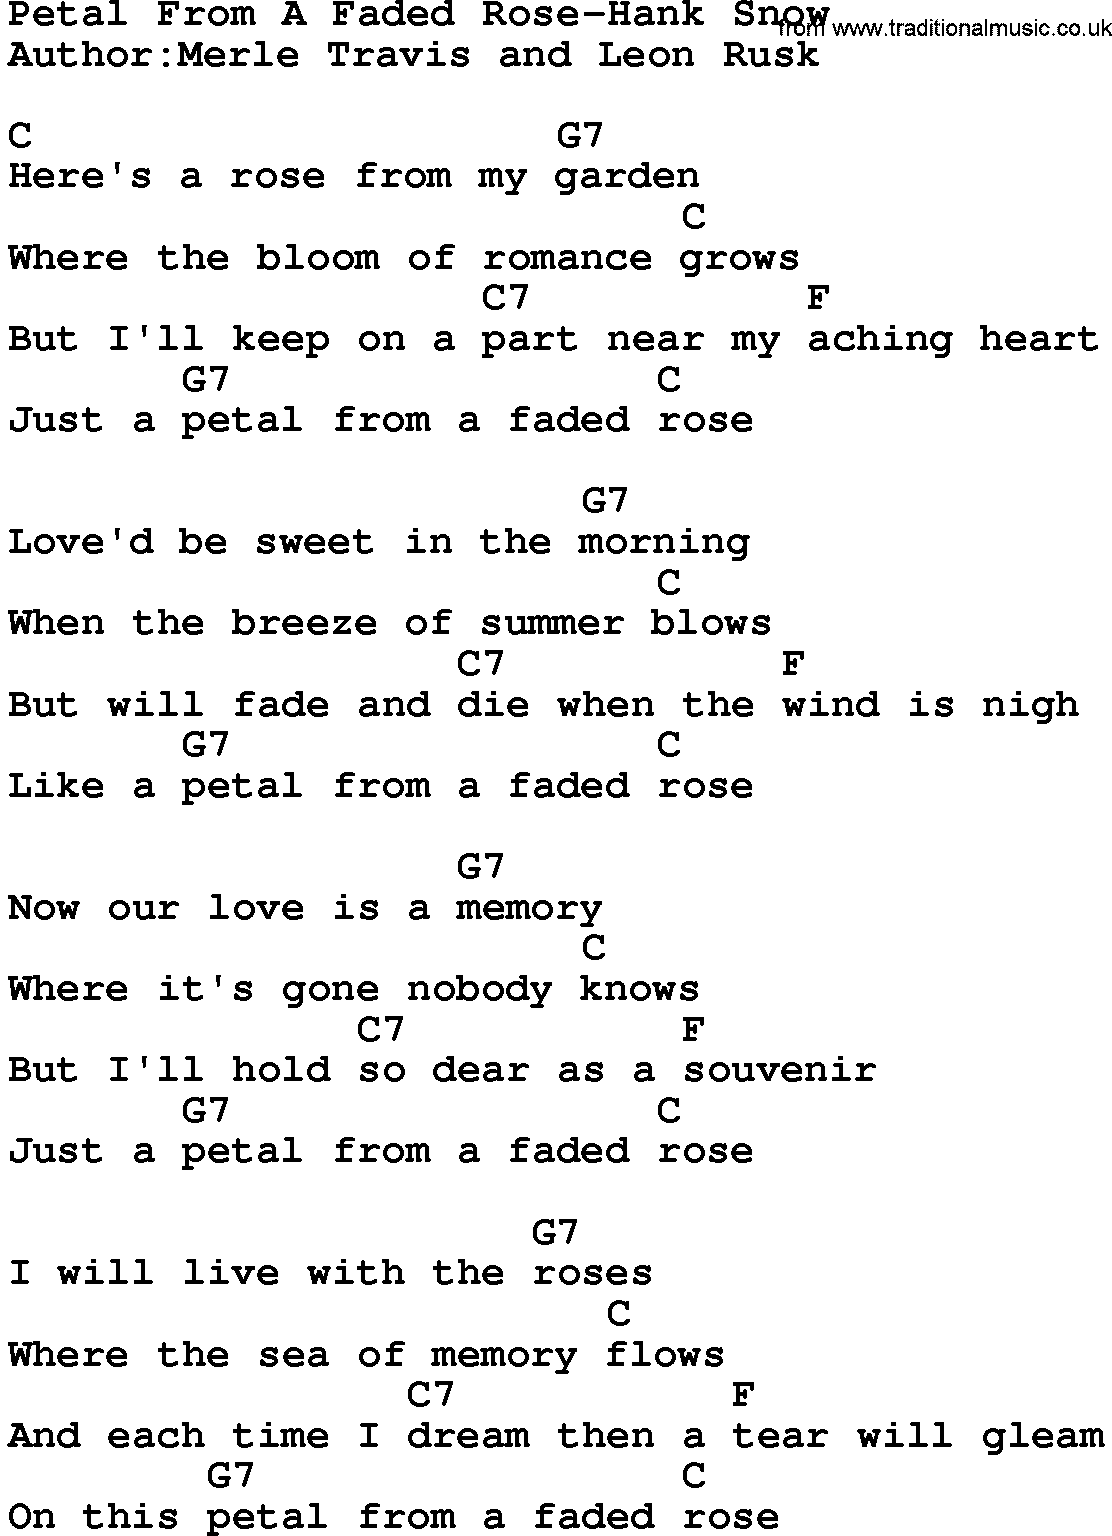 Country music song: Petal From A Faded Rose-Hank Snow lyrics and chords